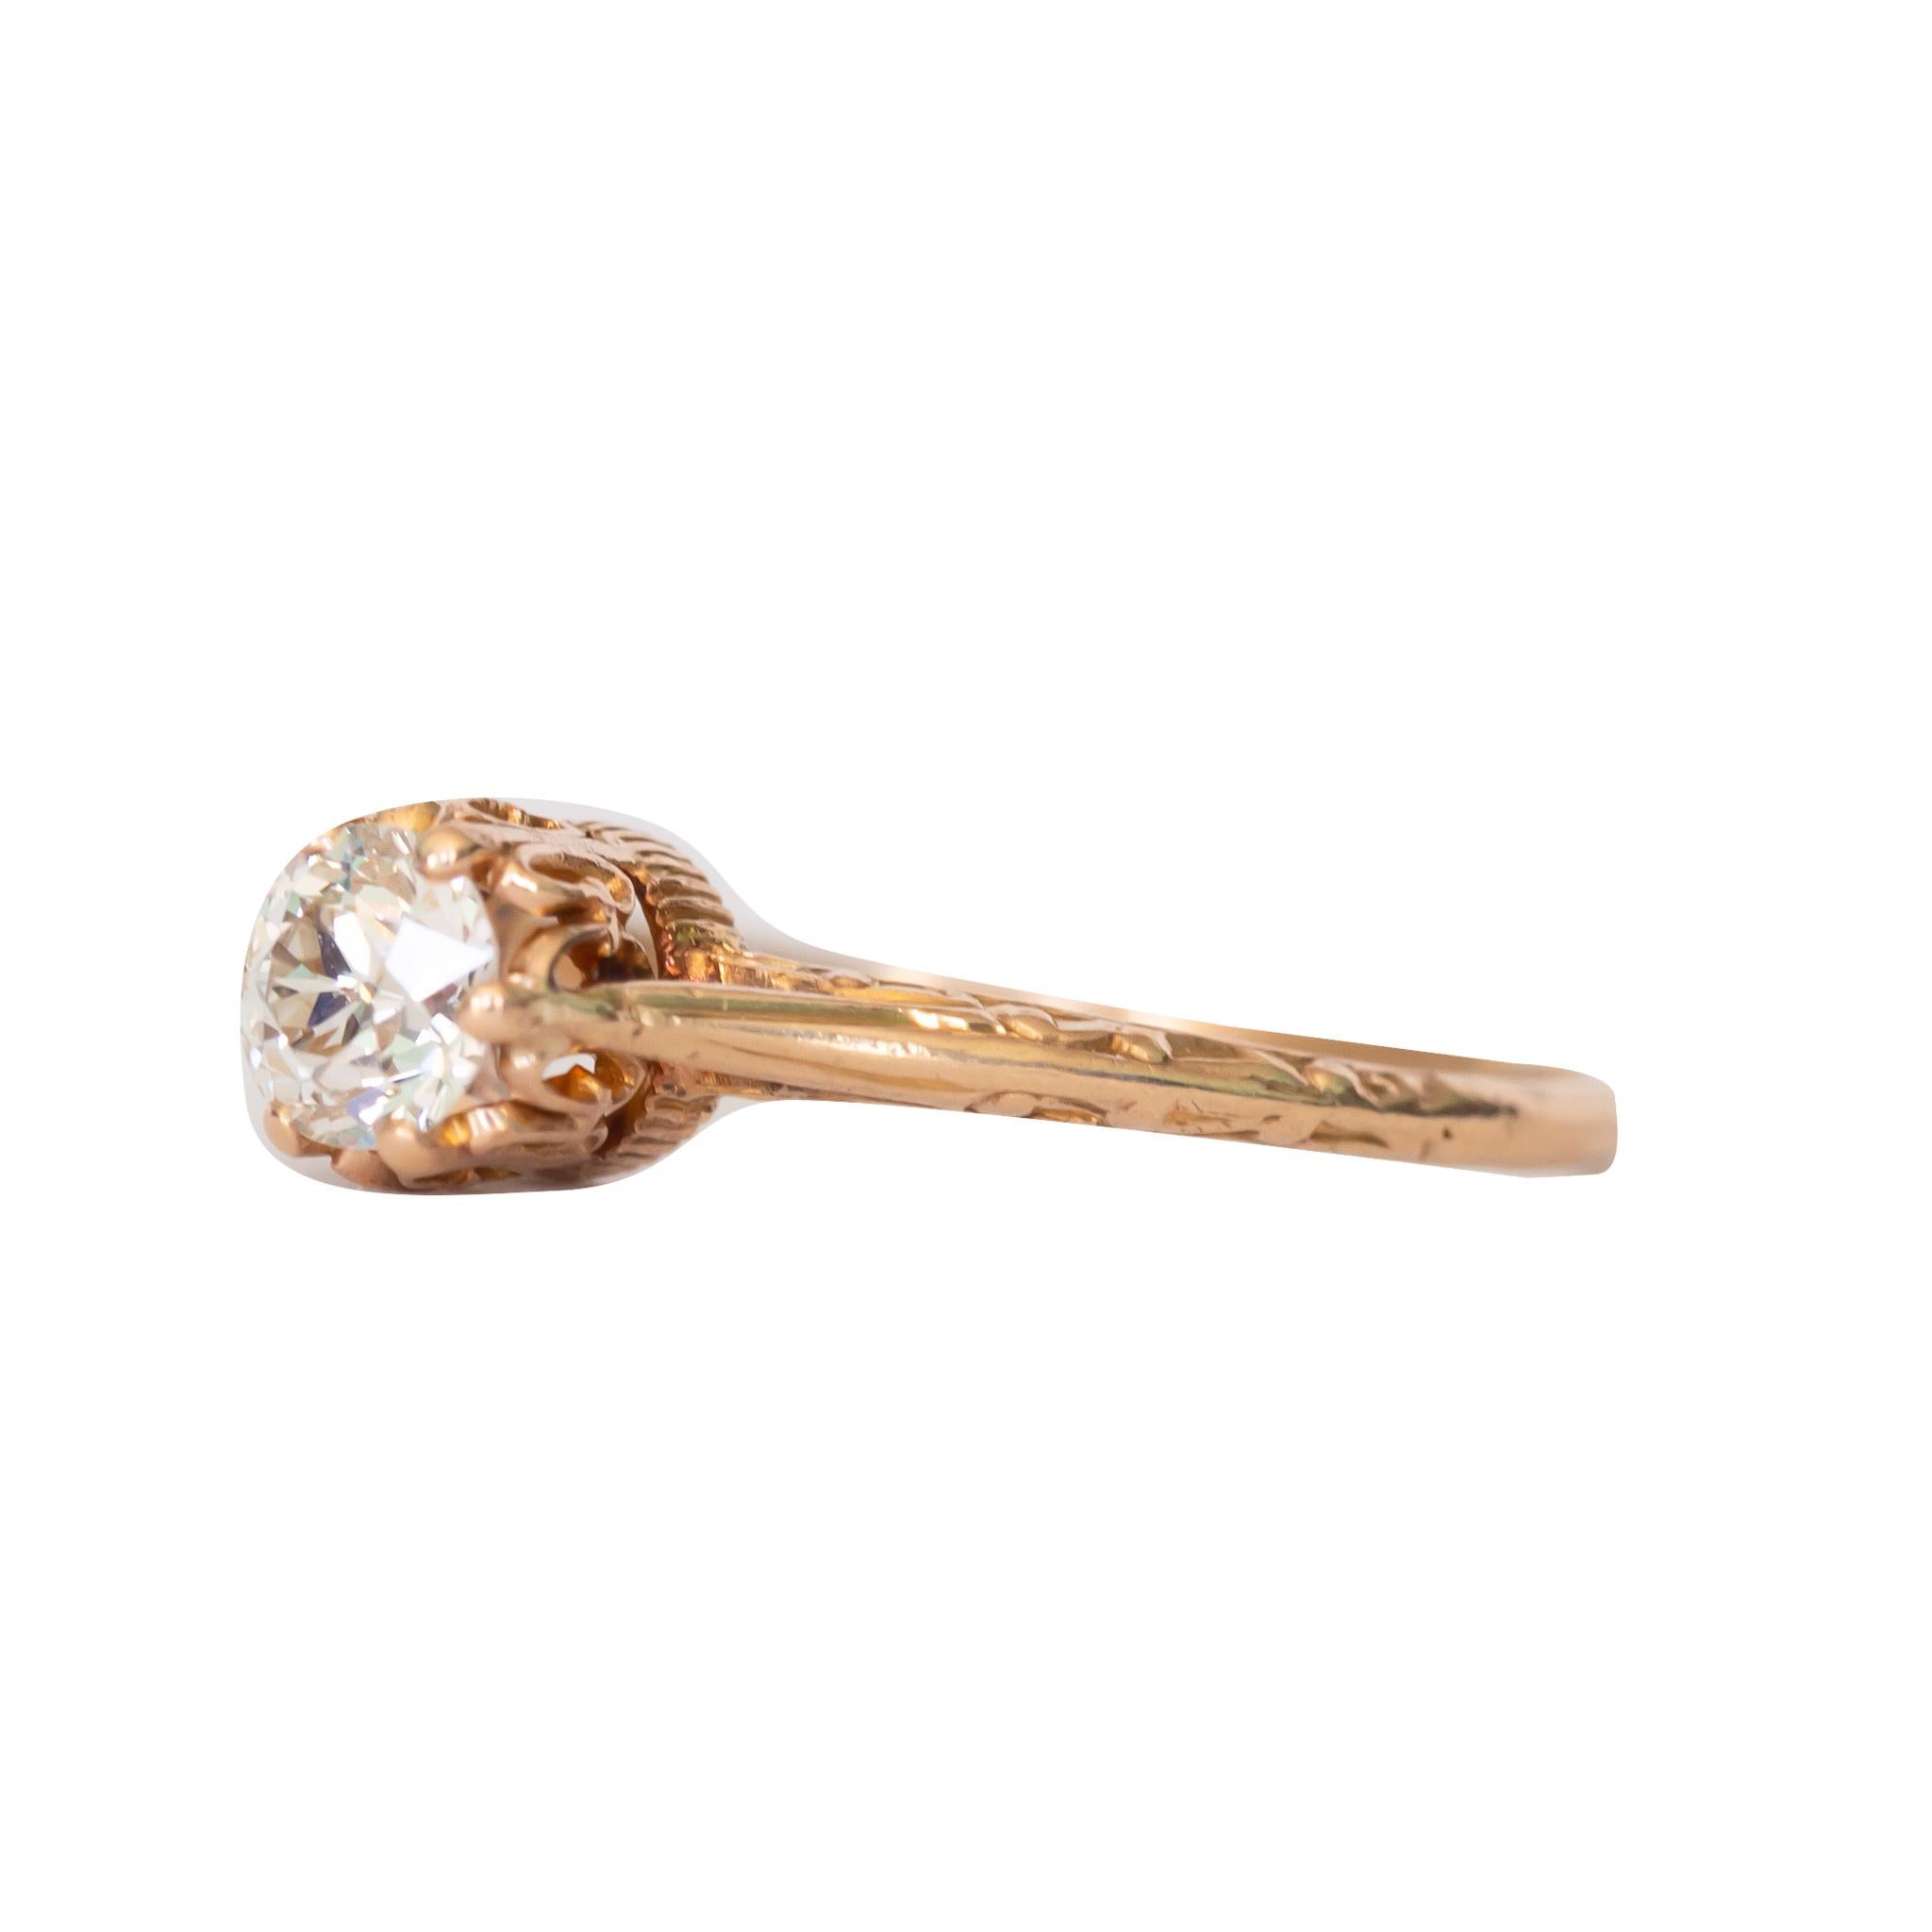 Ring Size: 6
Metal Type: 14K Yellow Gold [Hallmarked, and Tested]
Weight: 2.5 grams

Center Diamond Details:
GIA REPORT#5201384114
Weight: .63 carat
Cut: Old European
Color: I
Clarity: VS1

Finger to Top of Stone Measurement: 6.5mm
Condition: